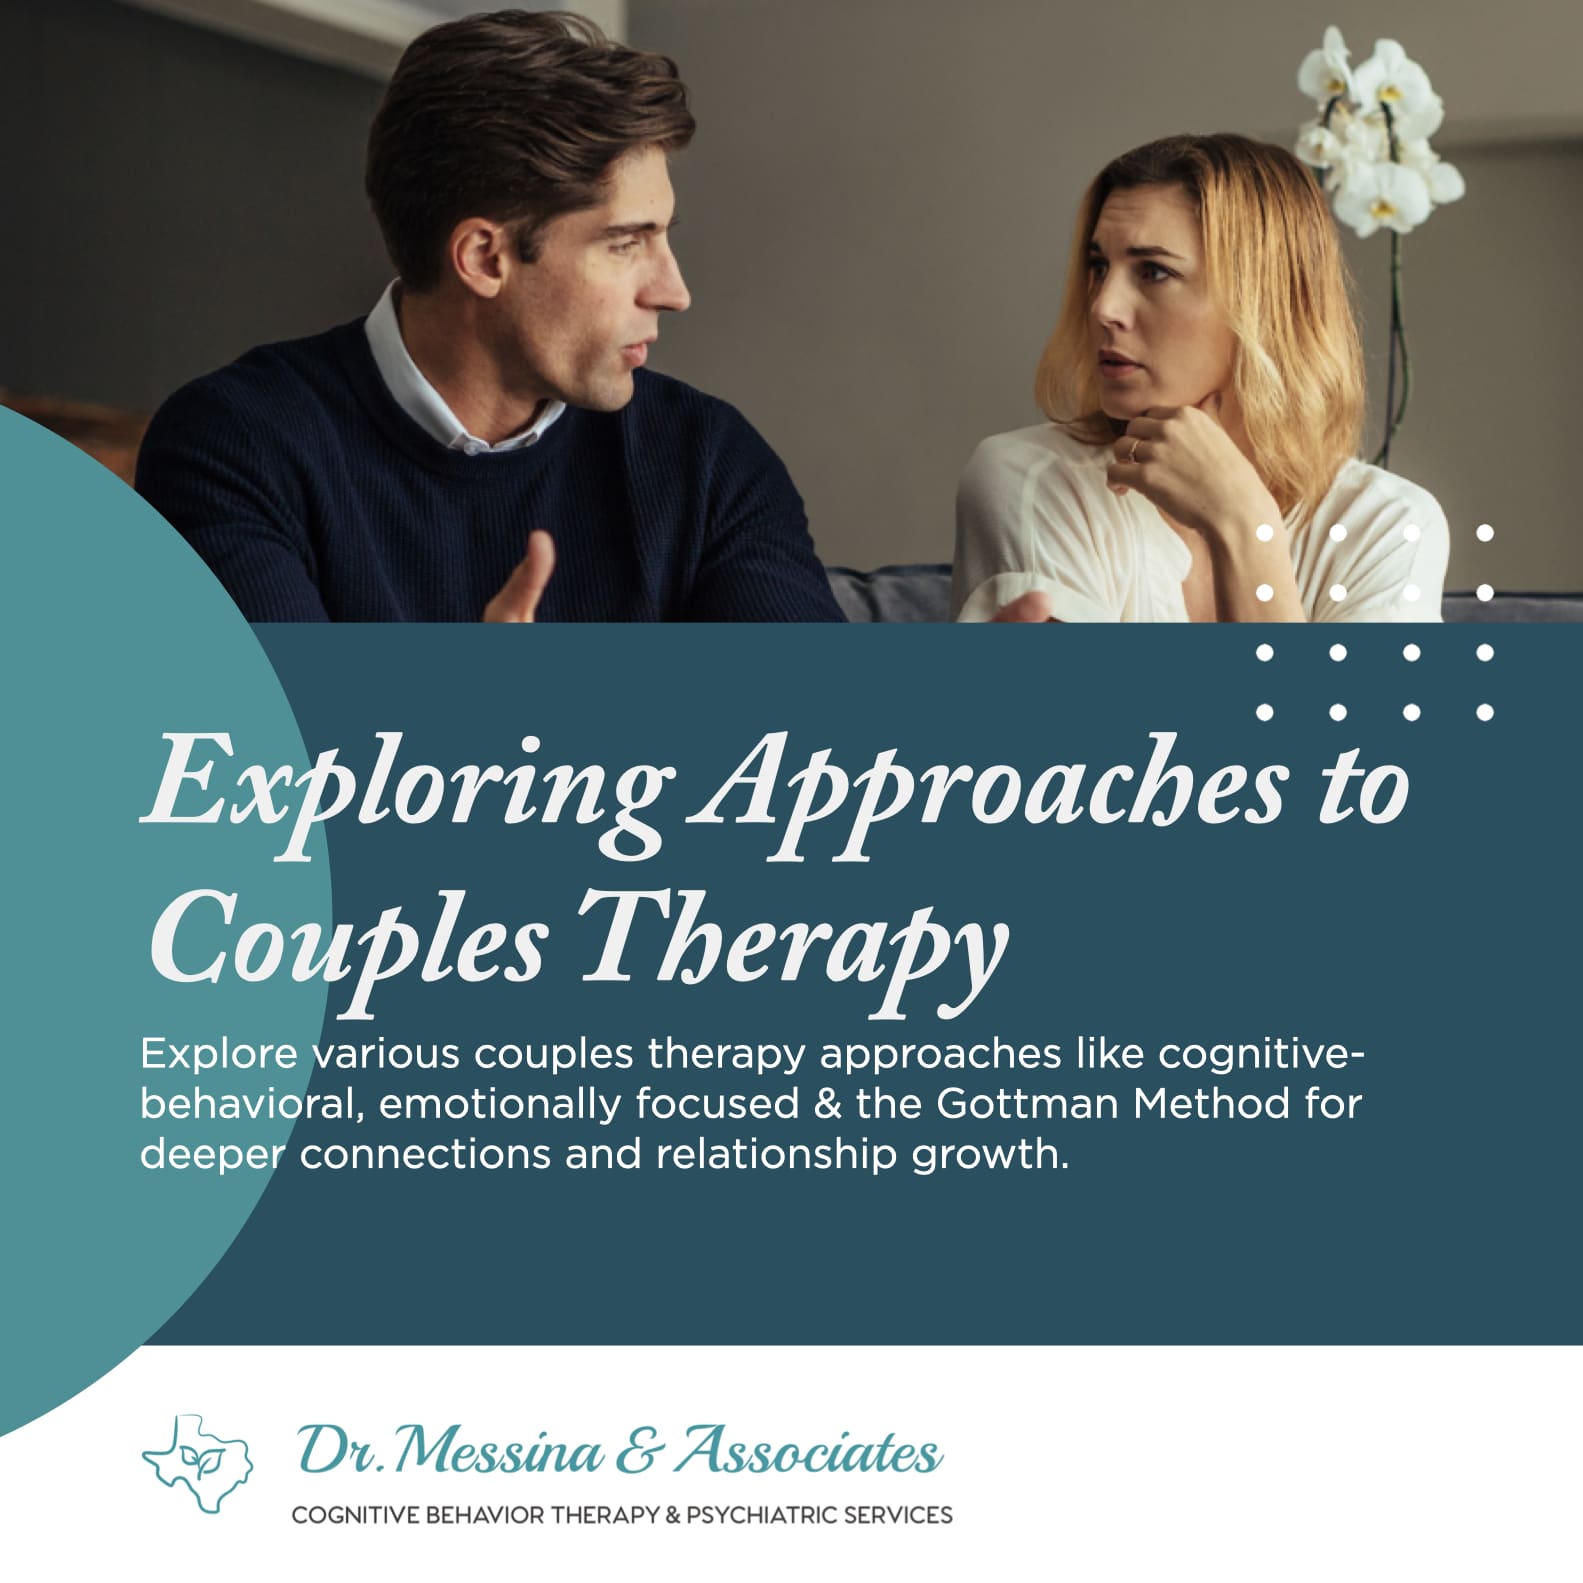 Exploring approaches to emotionally focused therapy in couples therapy.